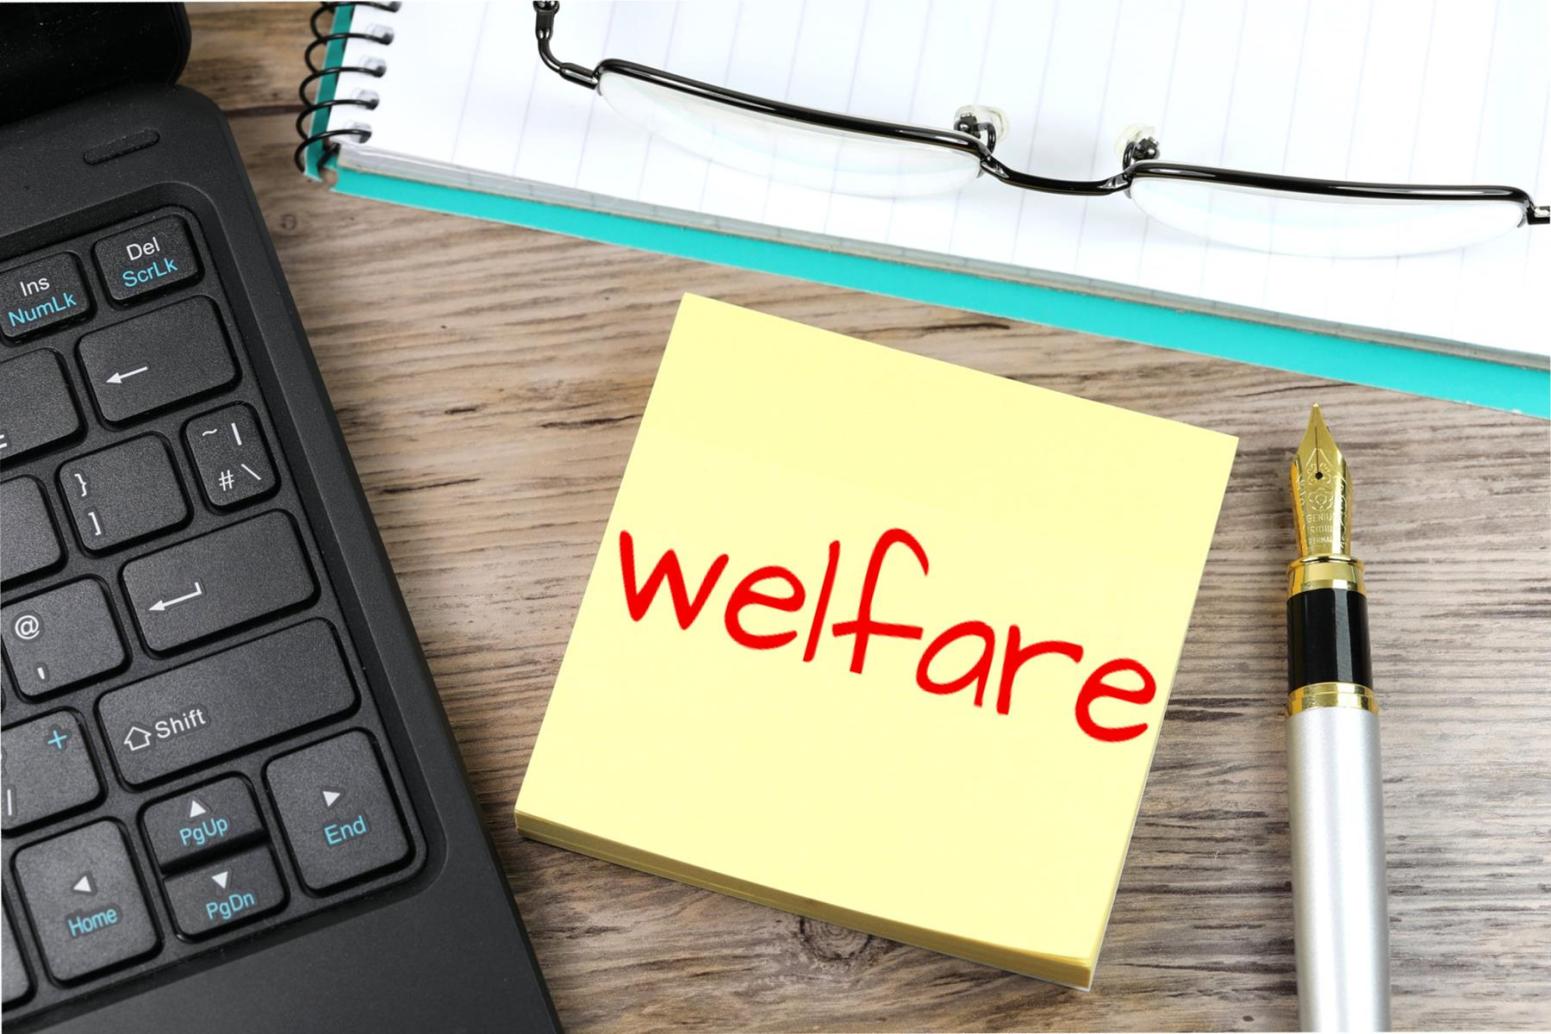 How Can We Balance the Role of Government in Providing Welfare and Promoting Individual Responsibility?